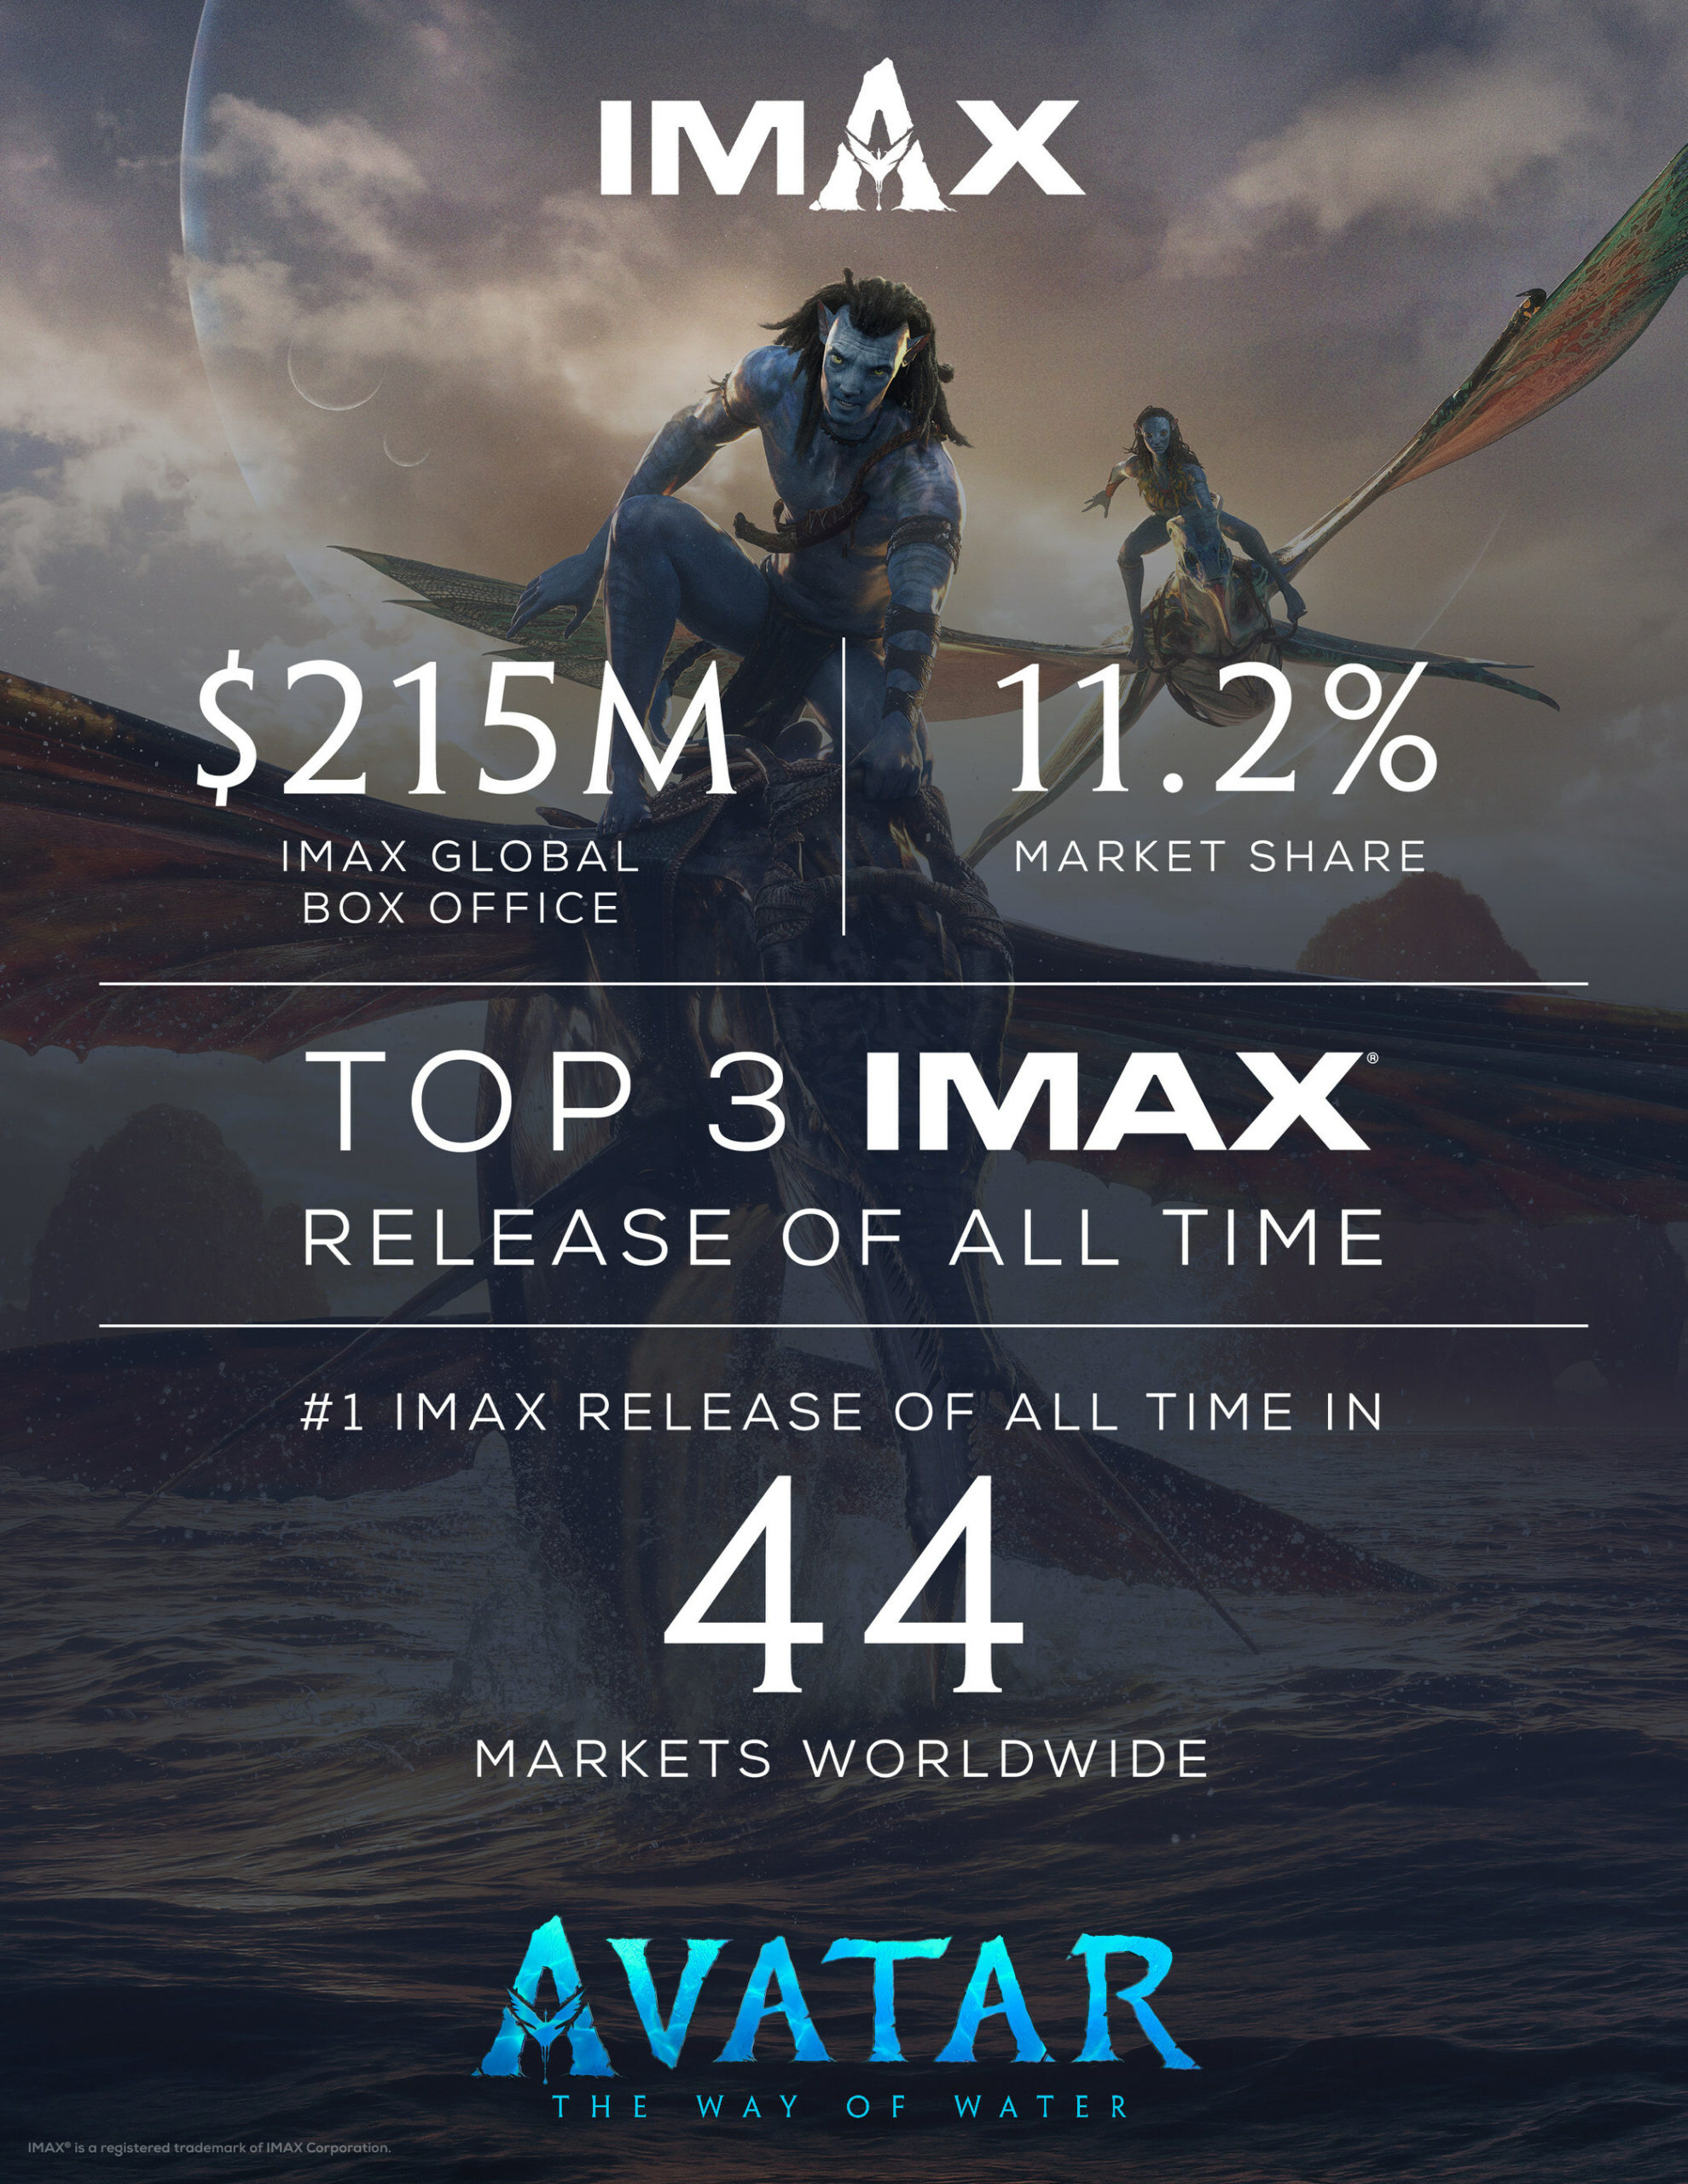 ting leninismen terrasse Avatar: The Way of Water Hits Top Three IMAX Releases of All Time with  $215M - Boxoffice